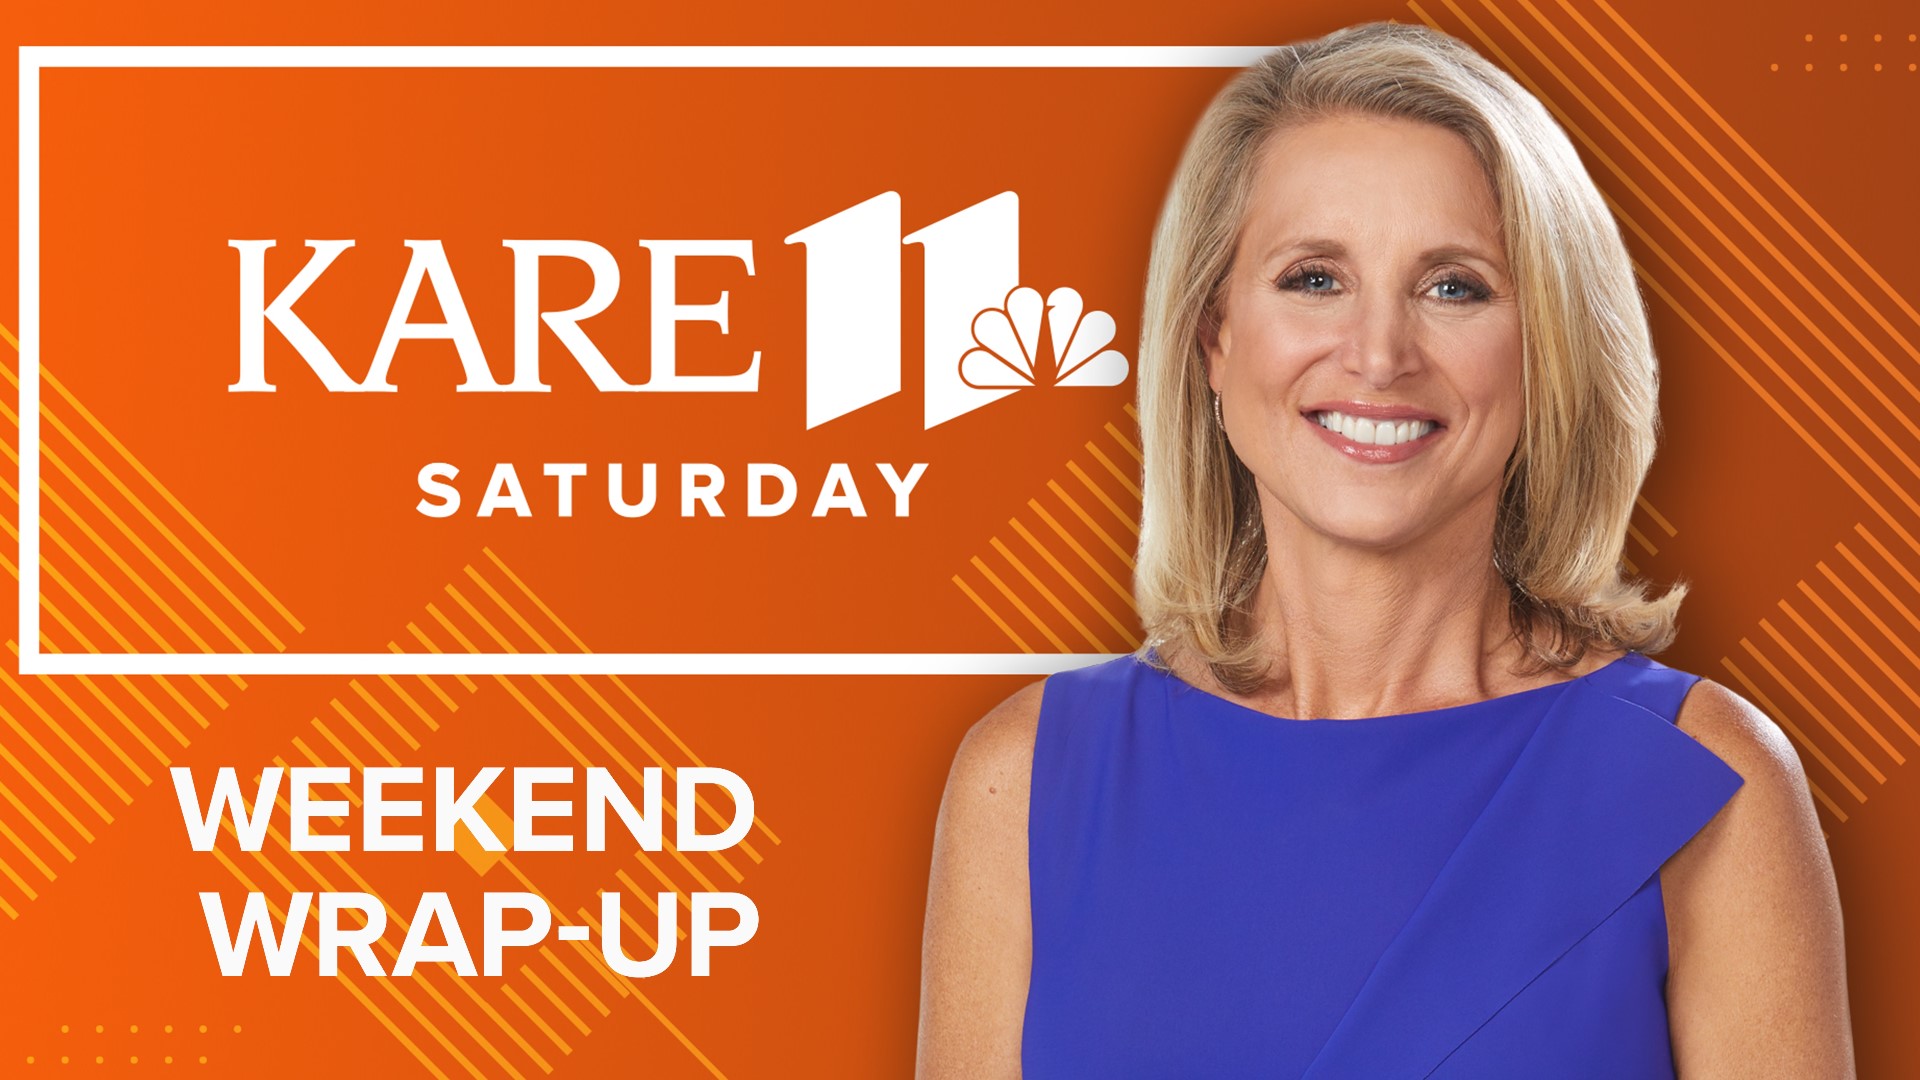 Check out the best segments from the KARE 11 Saturday show on March 18, 2023.